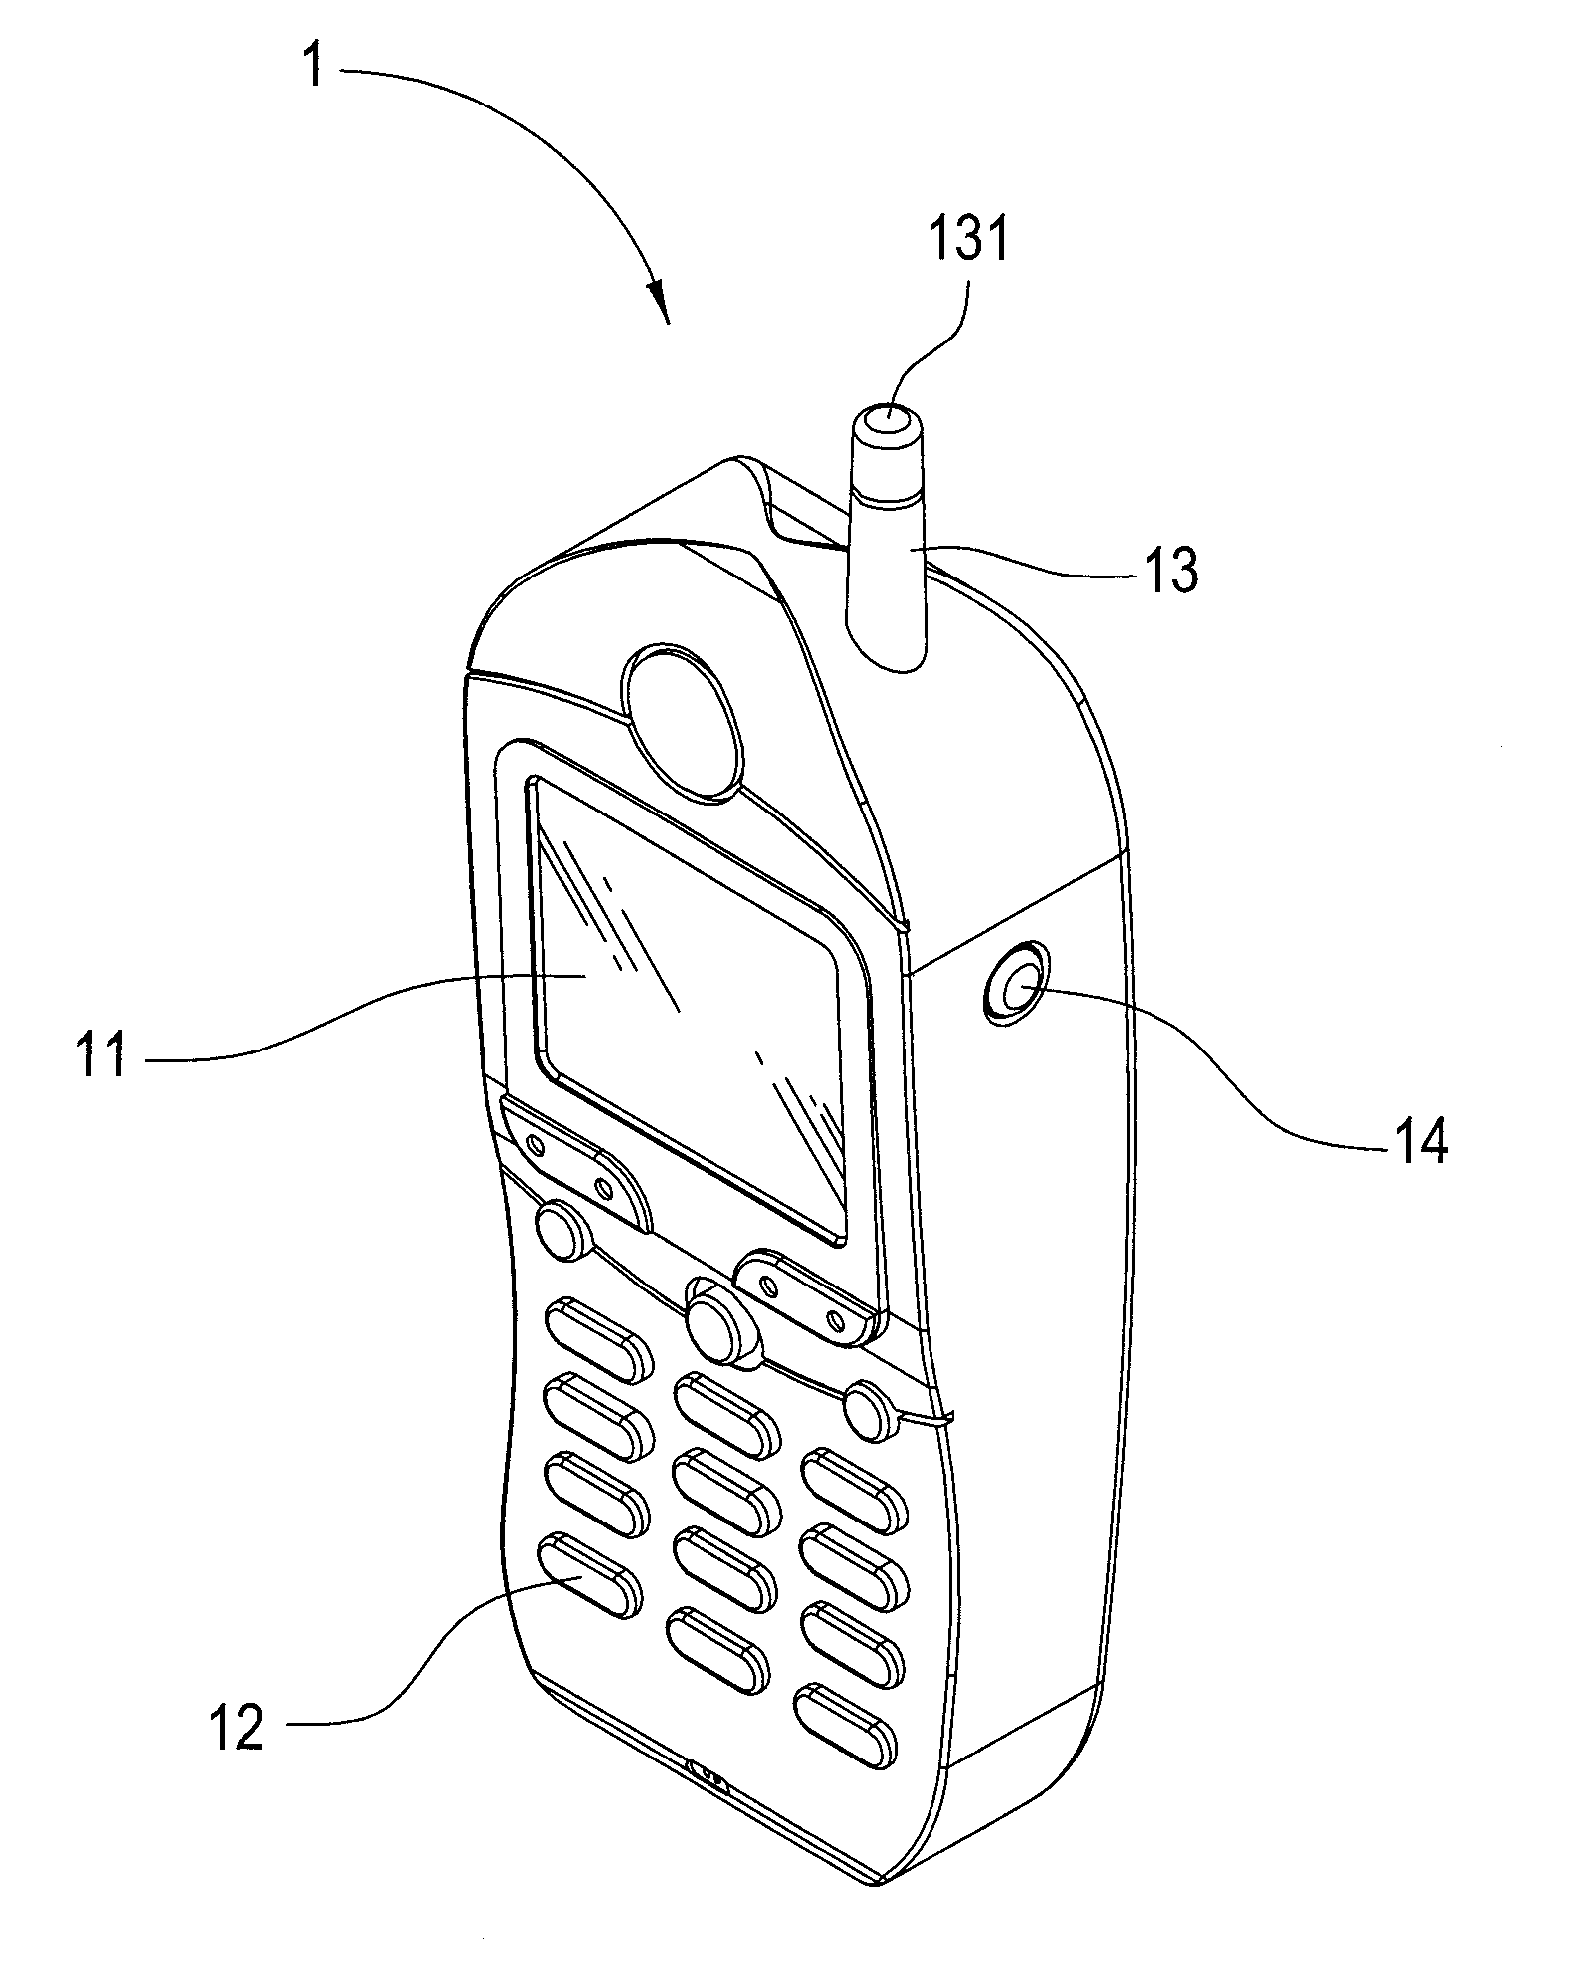 Mobile communication device provided with an ear temperature sensor